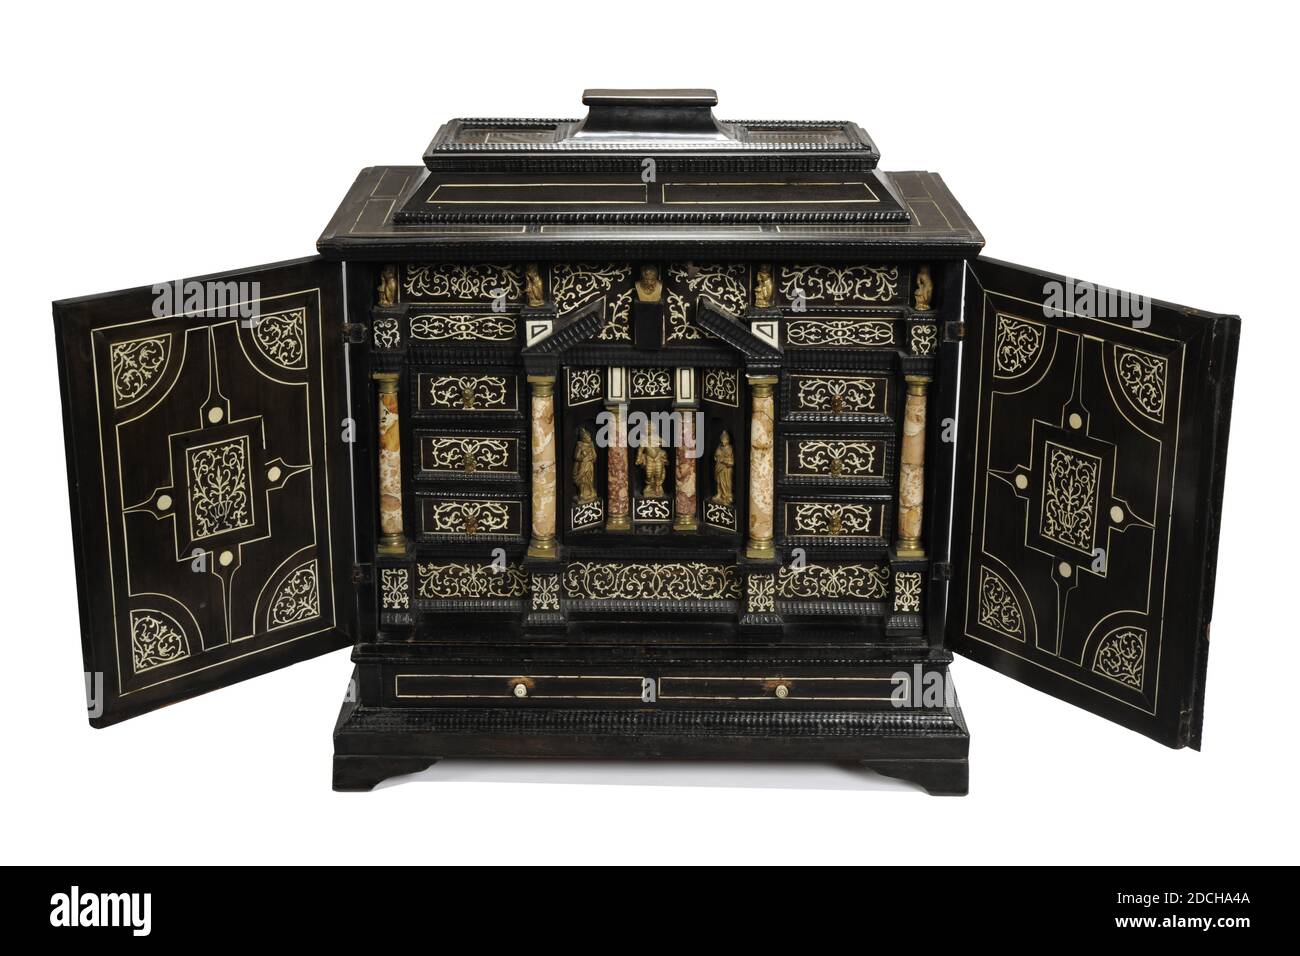 cabinet cupboard furniture, Anonymous, late 17th century, ebony, ivory, iron, spruce, General: 68.5 x 66.4 x 31.6cm 685 x 664 x 316mm, mythology, Germany, Art cabinet of spruce veneer with ebony and inlaid with ivory . The cabinet consists of a cabinet on a plinth with ball feet and a pillow-shaped lid on top. The cabinet is inlaid on the outside with a geometric pattern of ivory. The doors are inlaid both inside and out with a fine arcuate symmetrical Baroque decor filled with arabesques, birds, dolphins, fruit, mythological creatures and gods and goddesses. Black in white on the inside and Stock Photo